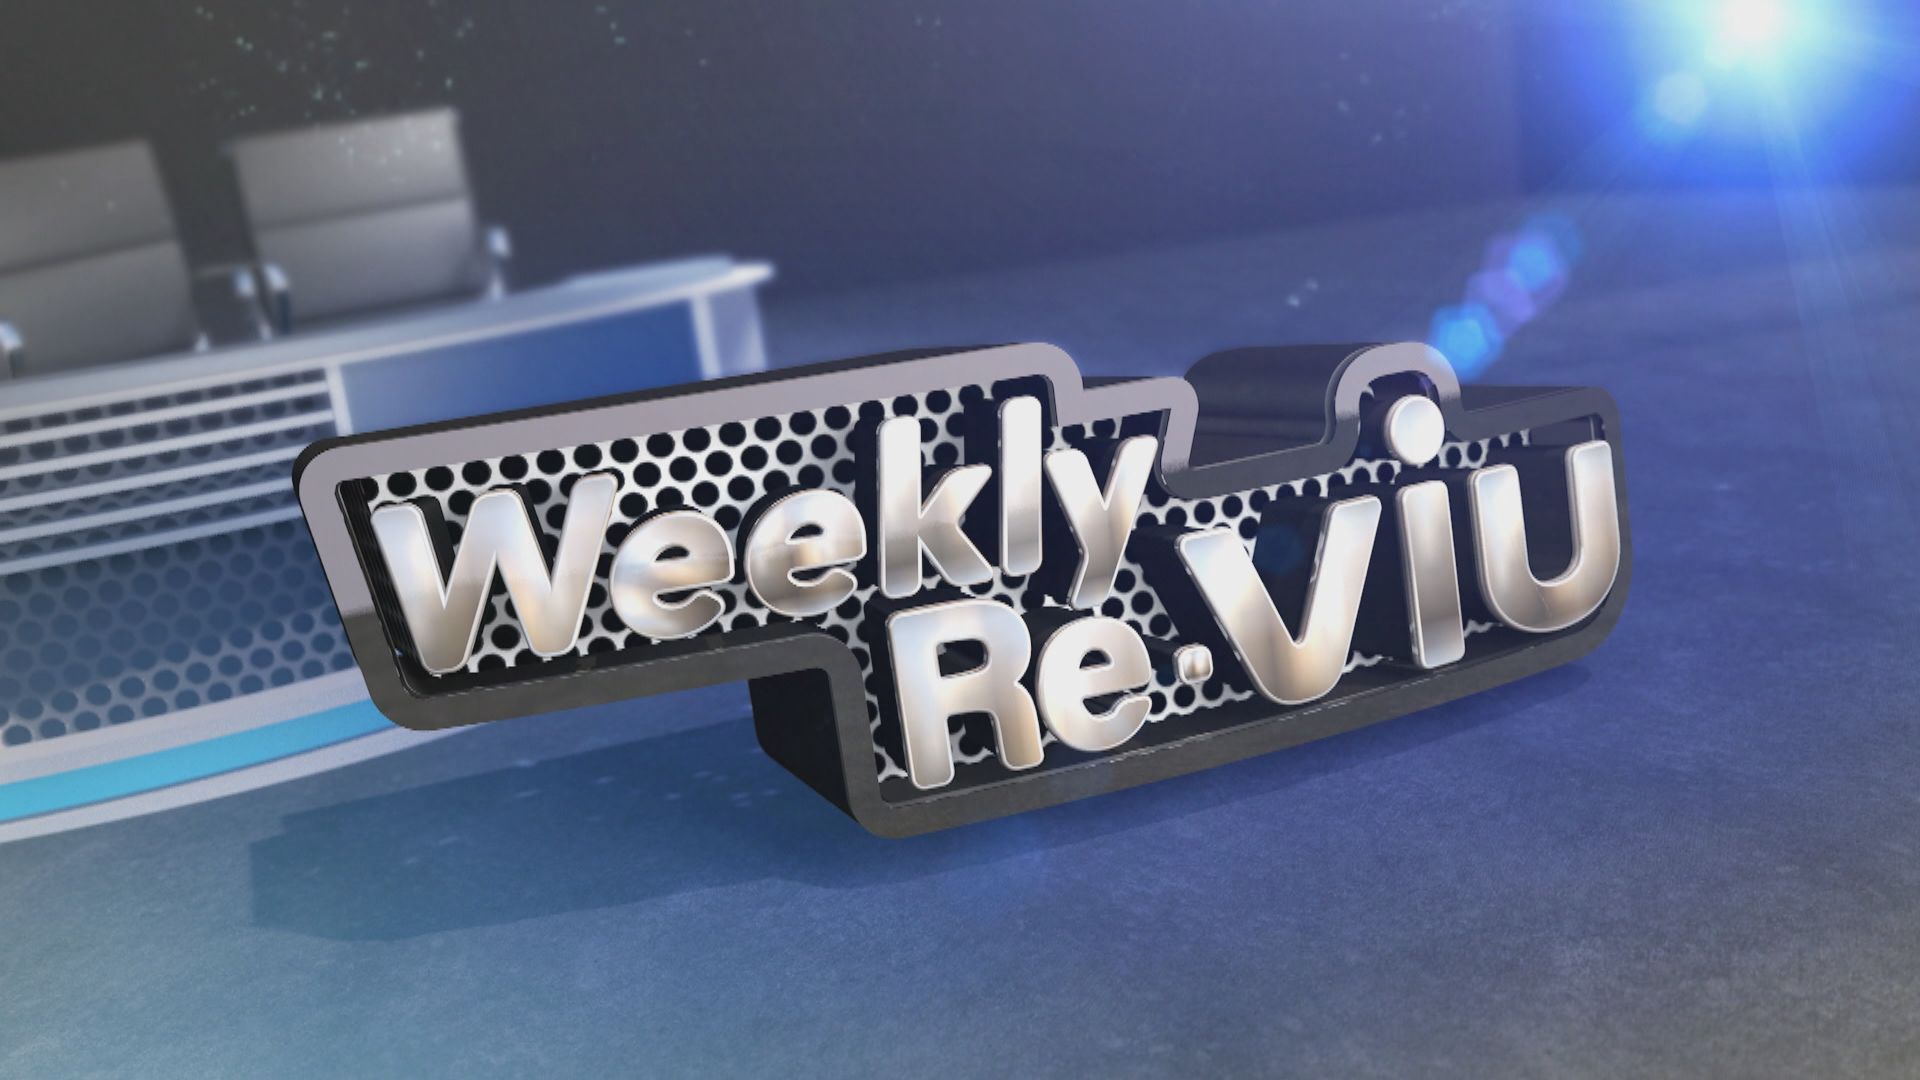 Weekly ReViu | Part Two - Story Roundup (29.4.2023)